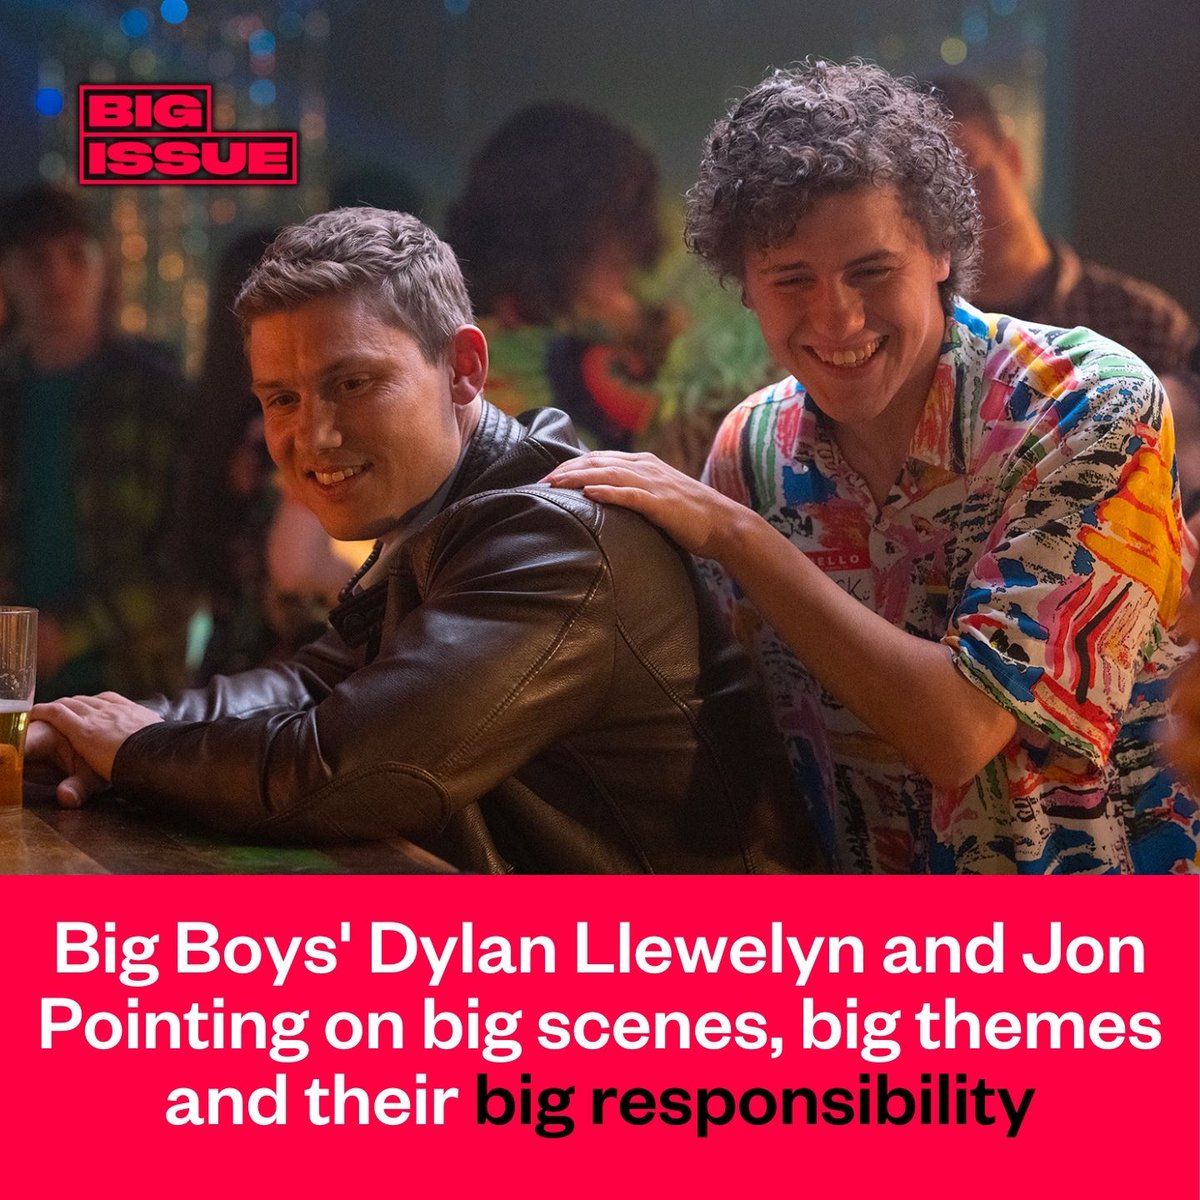 'It's been very overwhelming. But in a good way.' Big Boys stars @Djllewellyn and @JonPointing discuss the big themes and big moments that make Channel 4's queer coming-of-age comedy a classic. bigissue.com/culture/tv/big…